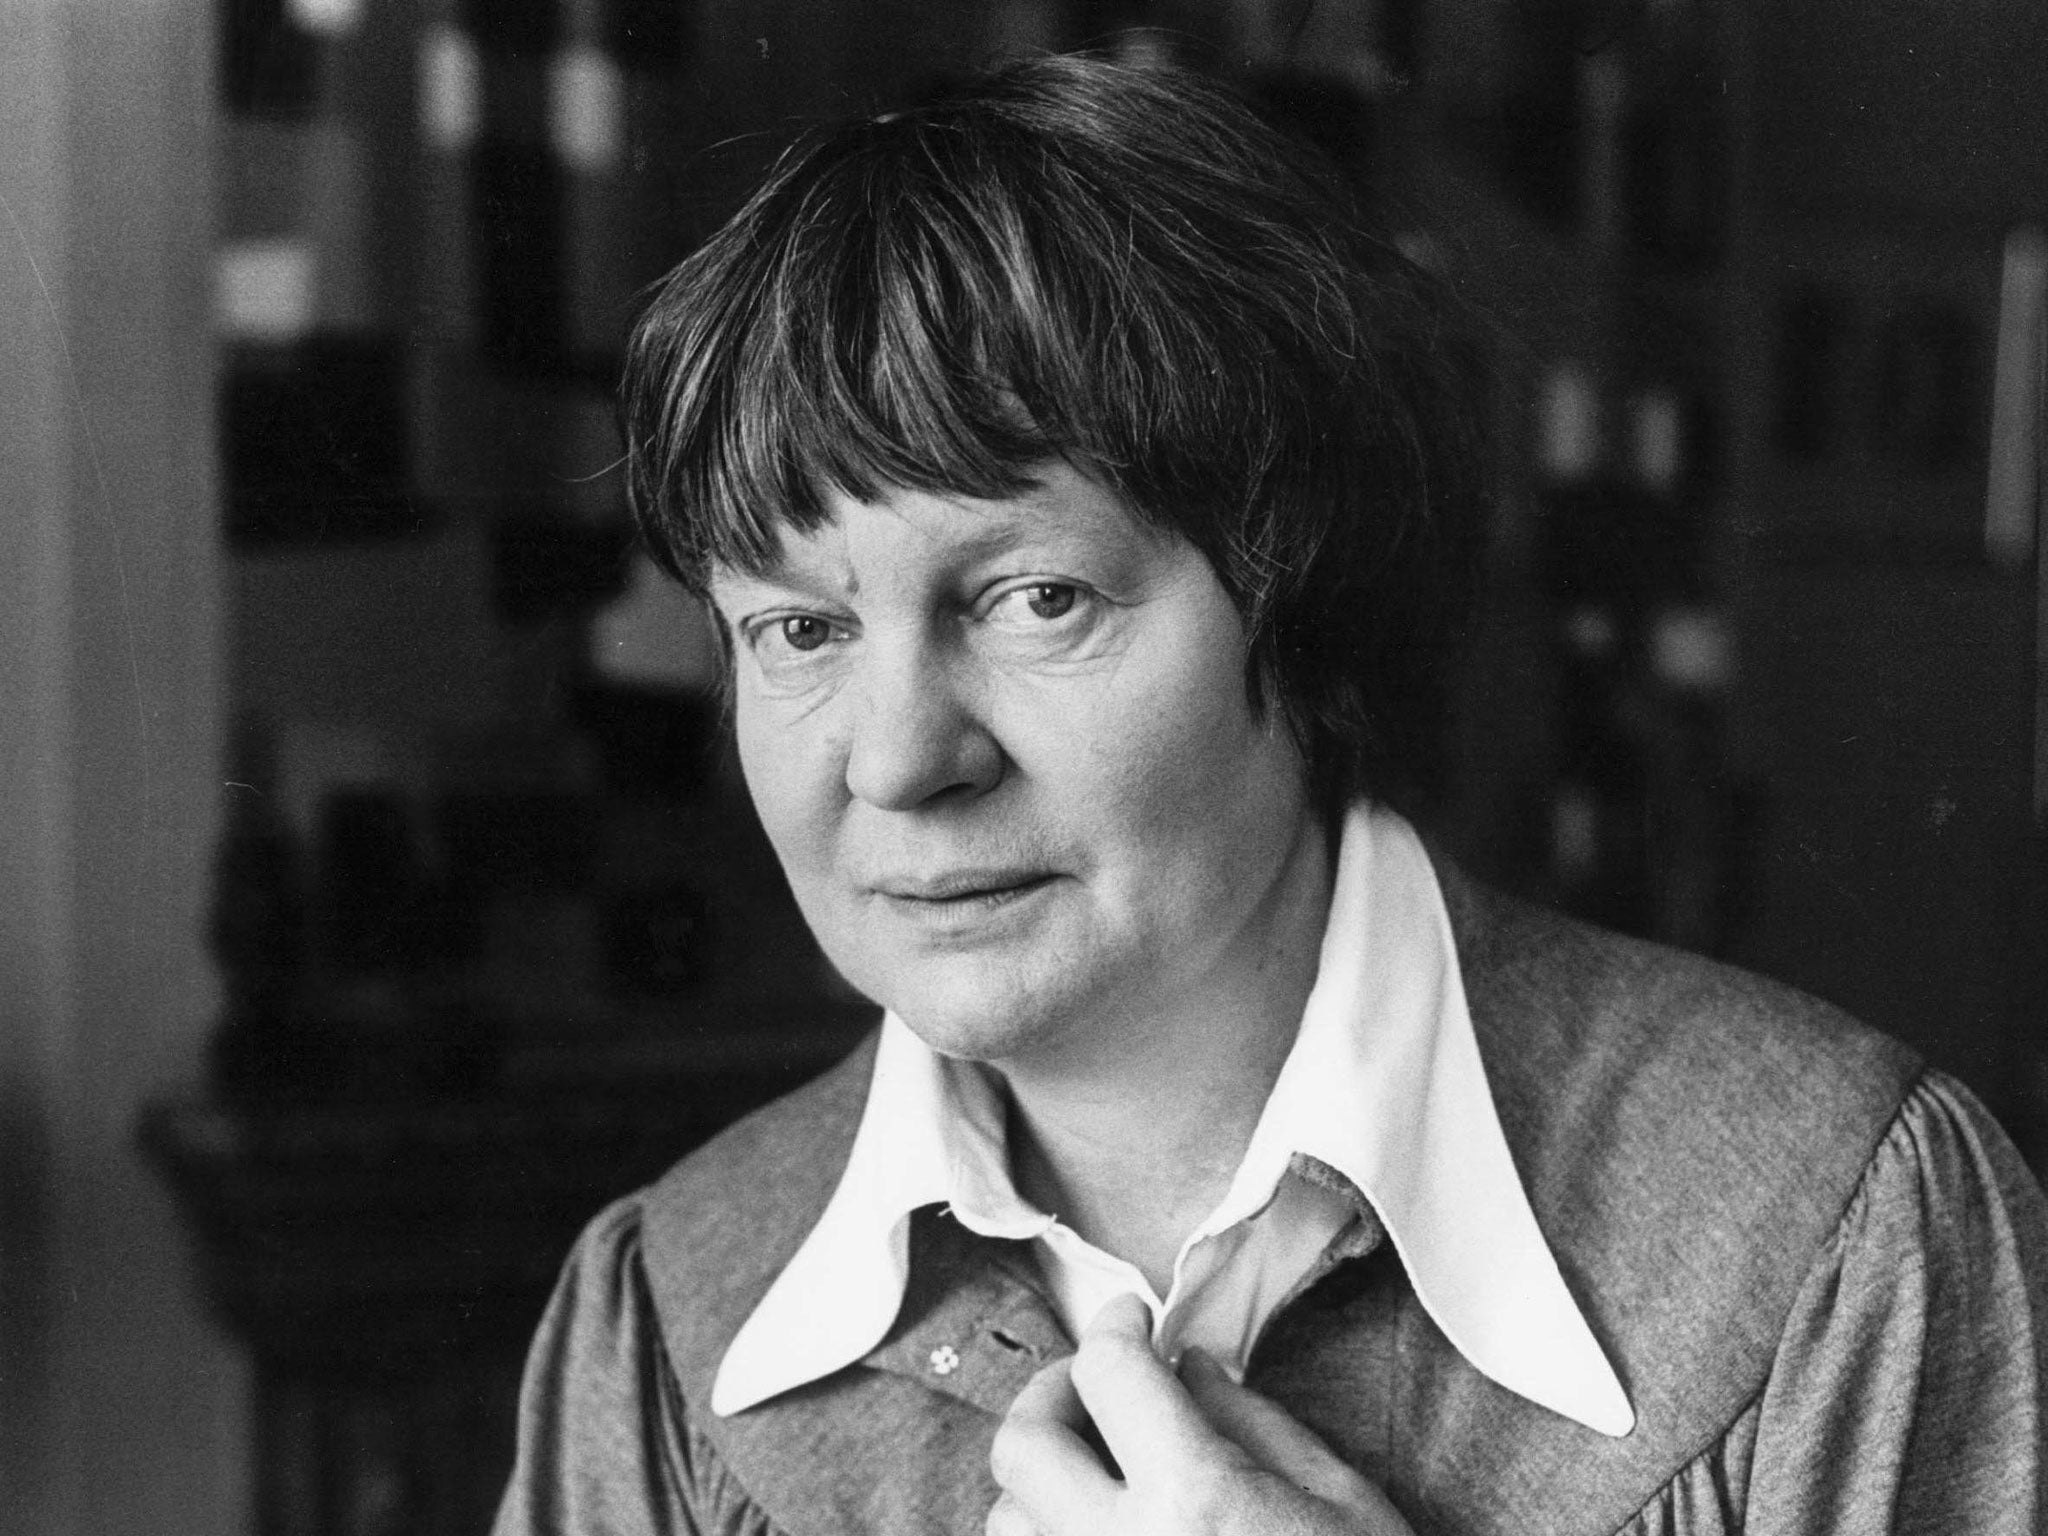 ‘Indefatigable letter writer’: Iris Murdoch’s letters give a sense of her intellectual promiscuity